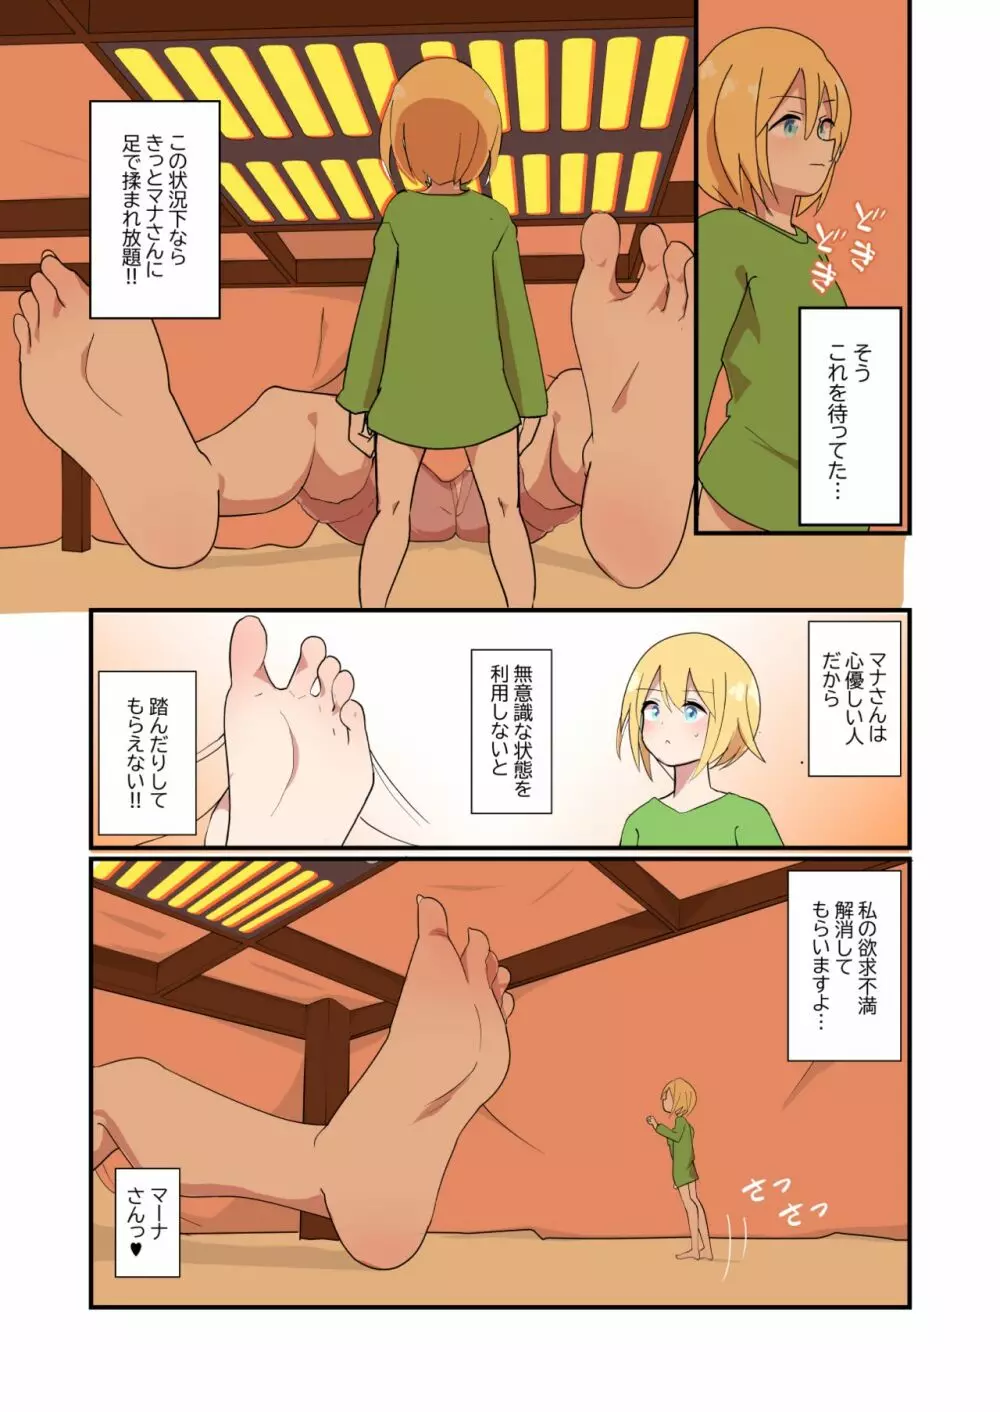 Mana Only Knows - 2021年01月分 Page.2